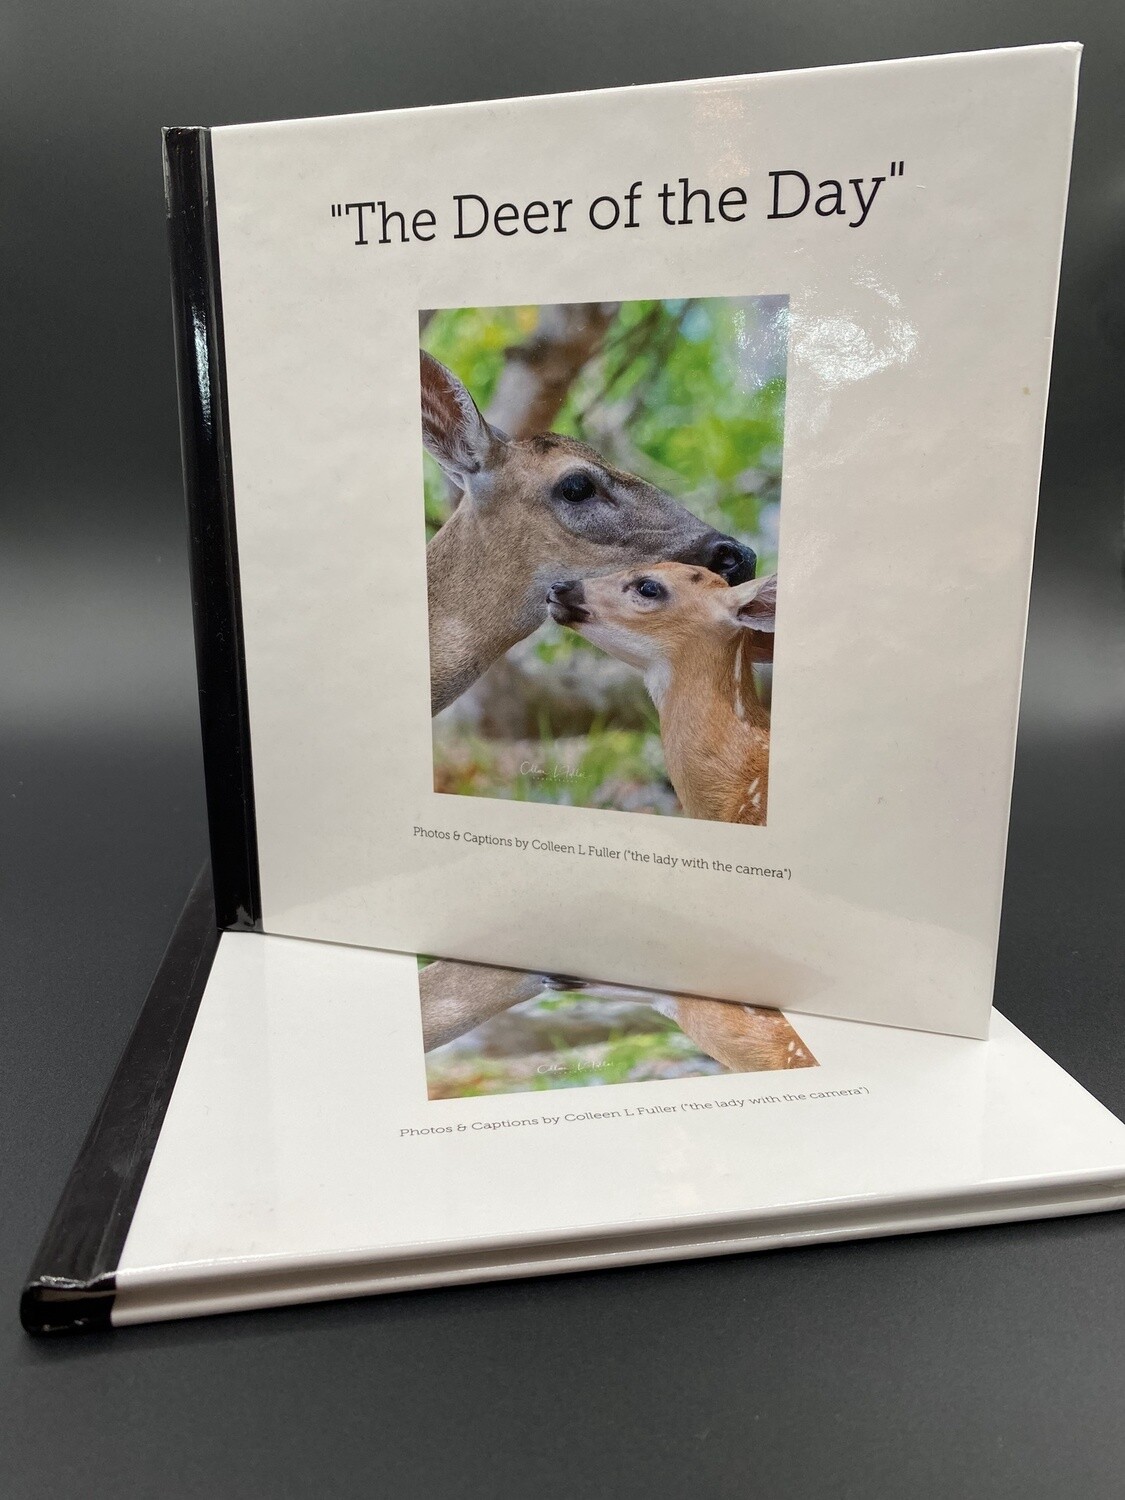 "The Deer of the Day"